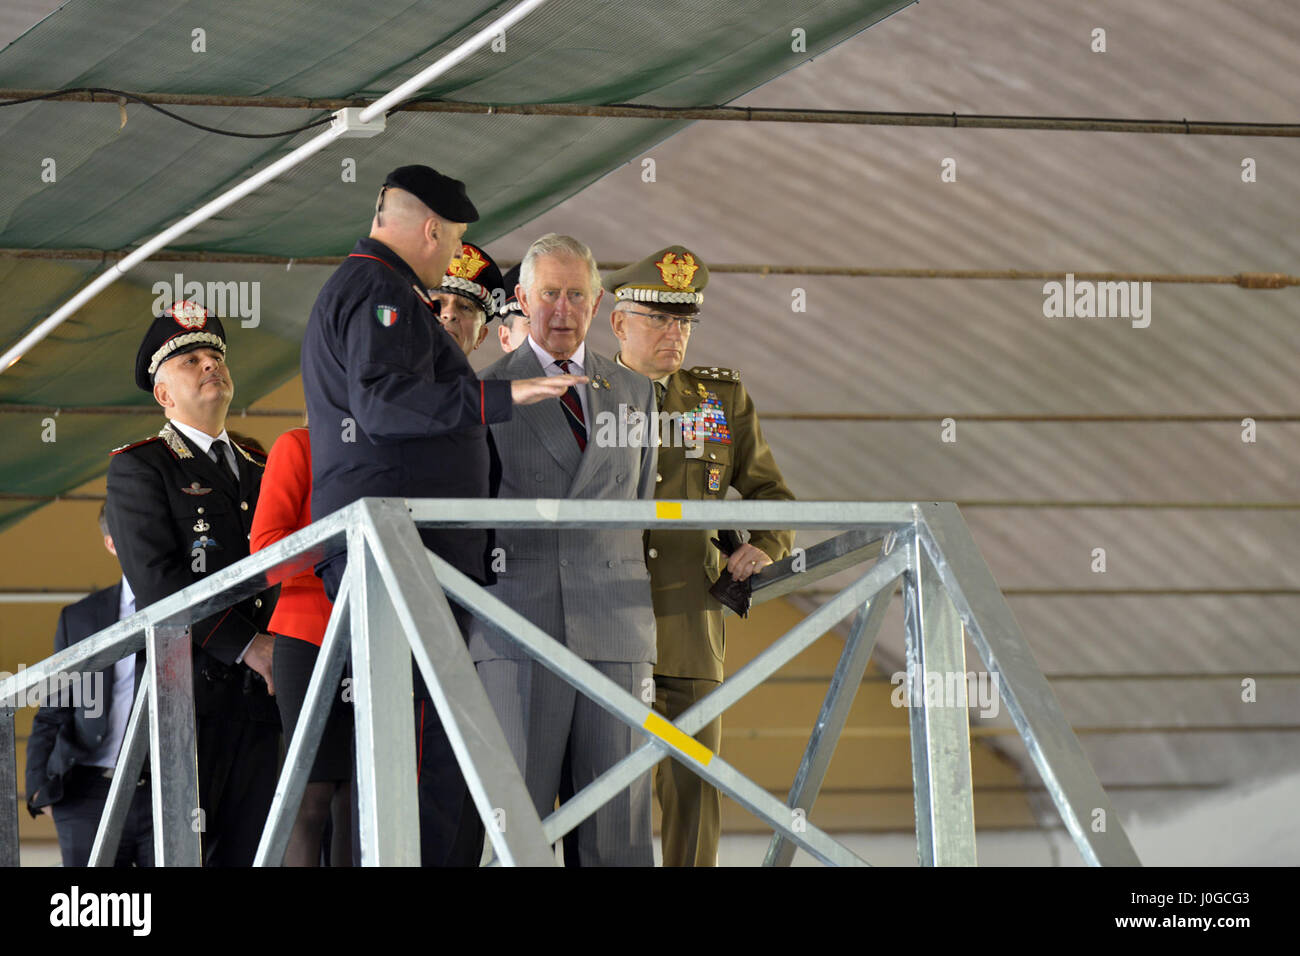 The Royal Highness, Prince Charles, Prince of Wales, observes a student training demonstration, during visit at Center of Excellence for Stability Police Units (CoESPU) Vicenza, Italy, April 1, 2017. (U.S. Army Photo by Visual Information Specialist Antonio Bedin/released) Stock Photo